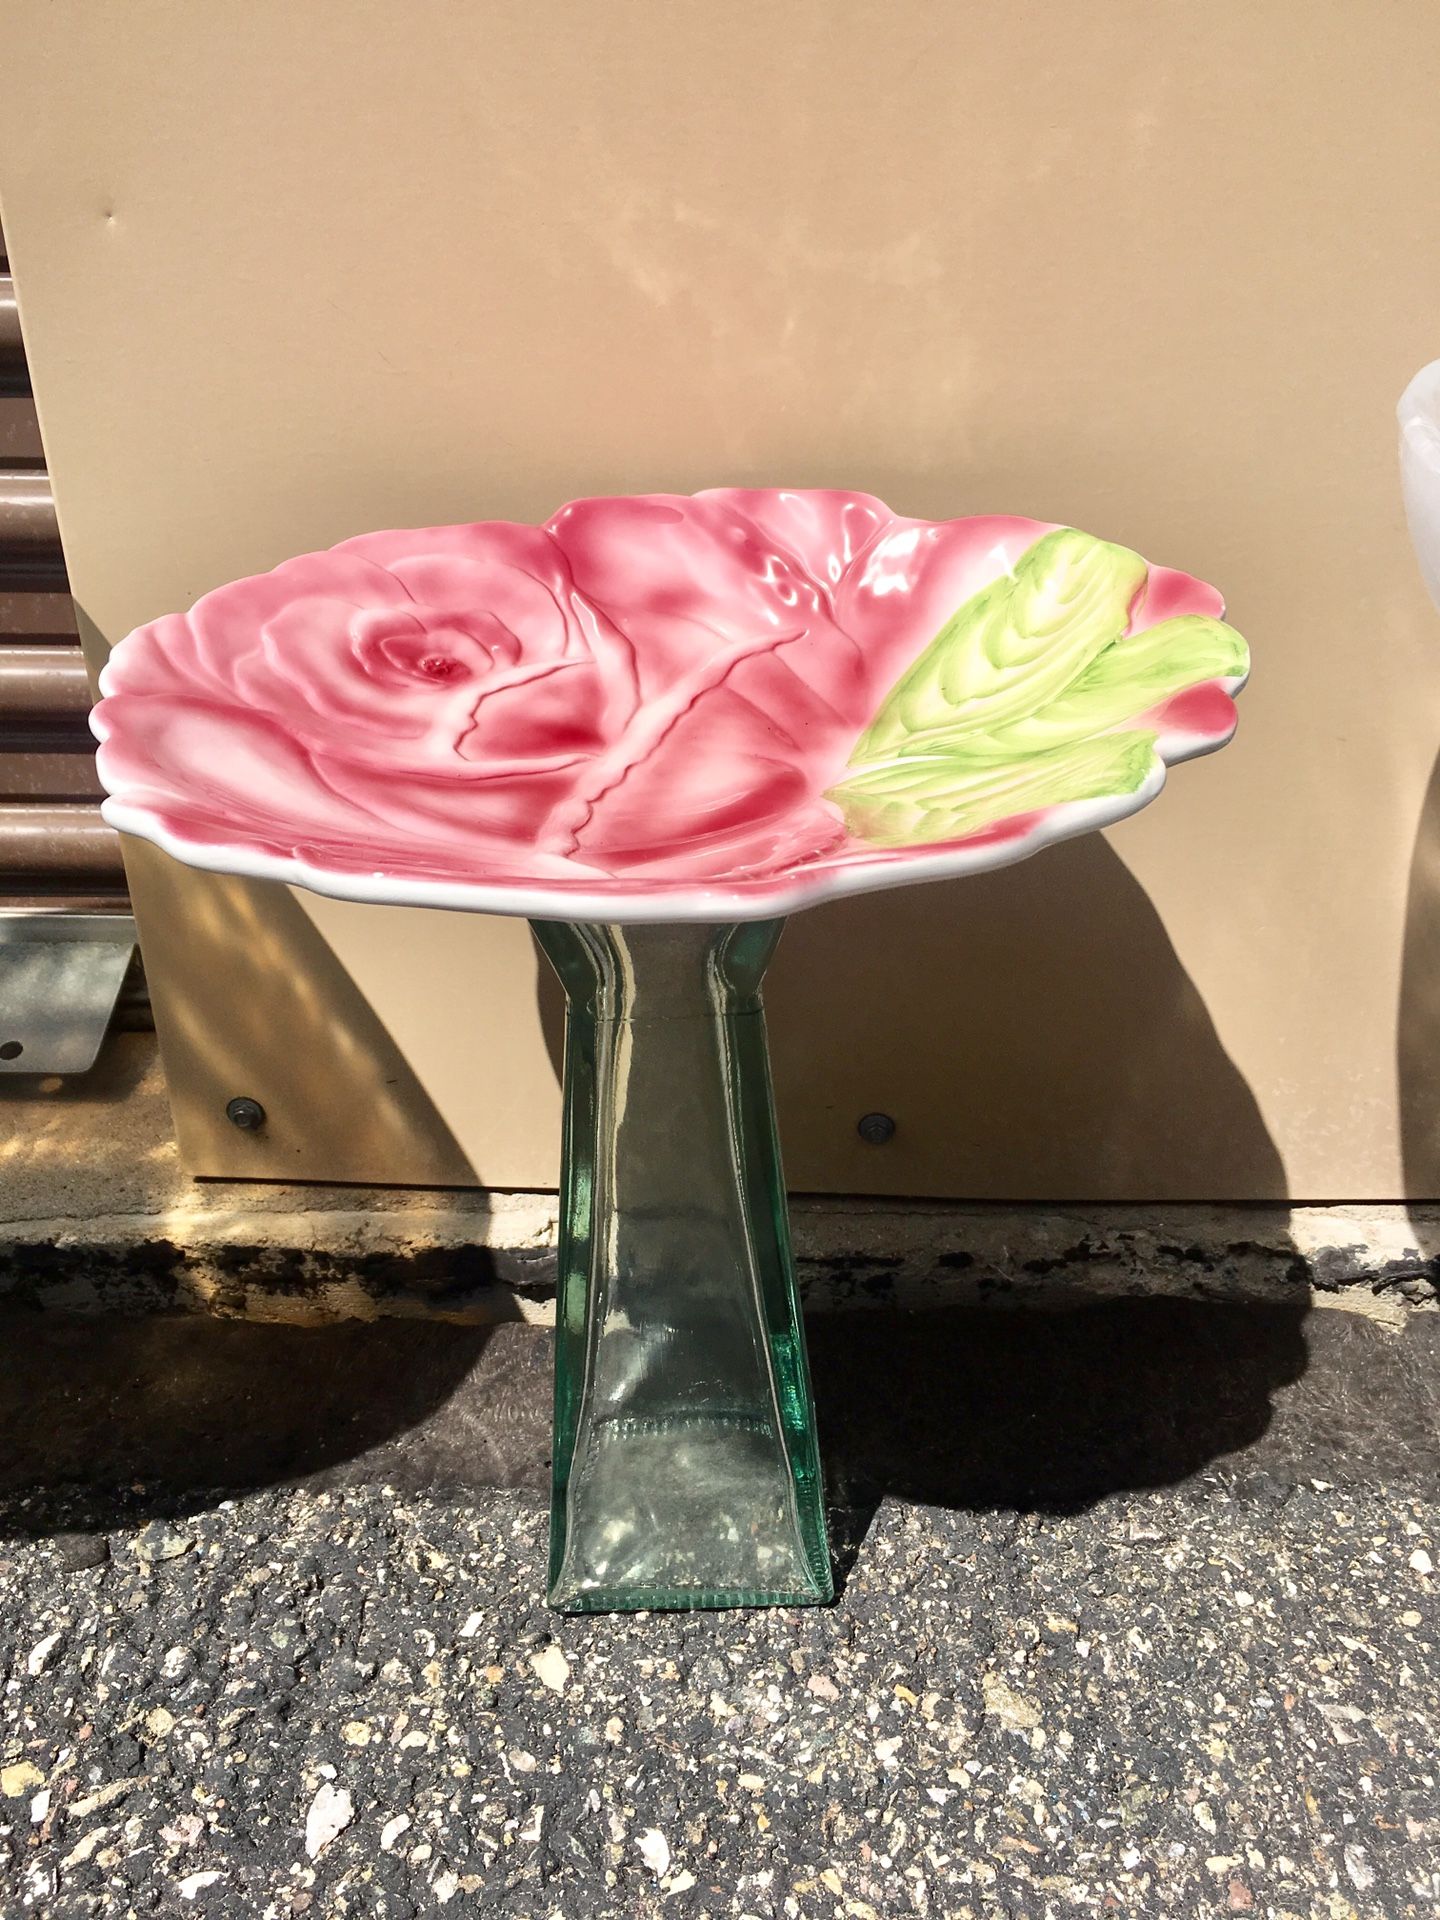 Bird Bath Feeder for your garden. Cute pink Rose glass bowl with green glass stand 15"h